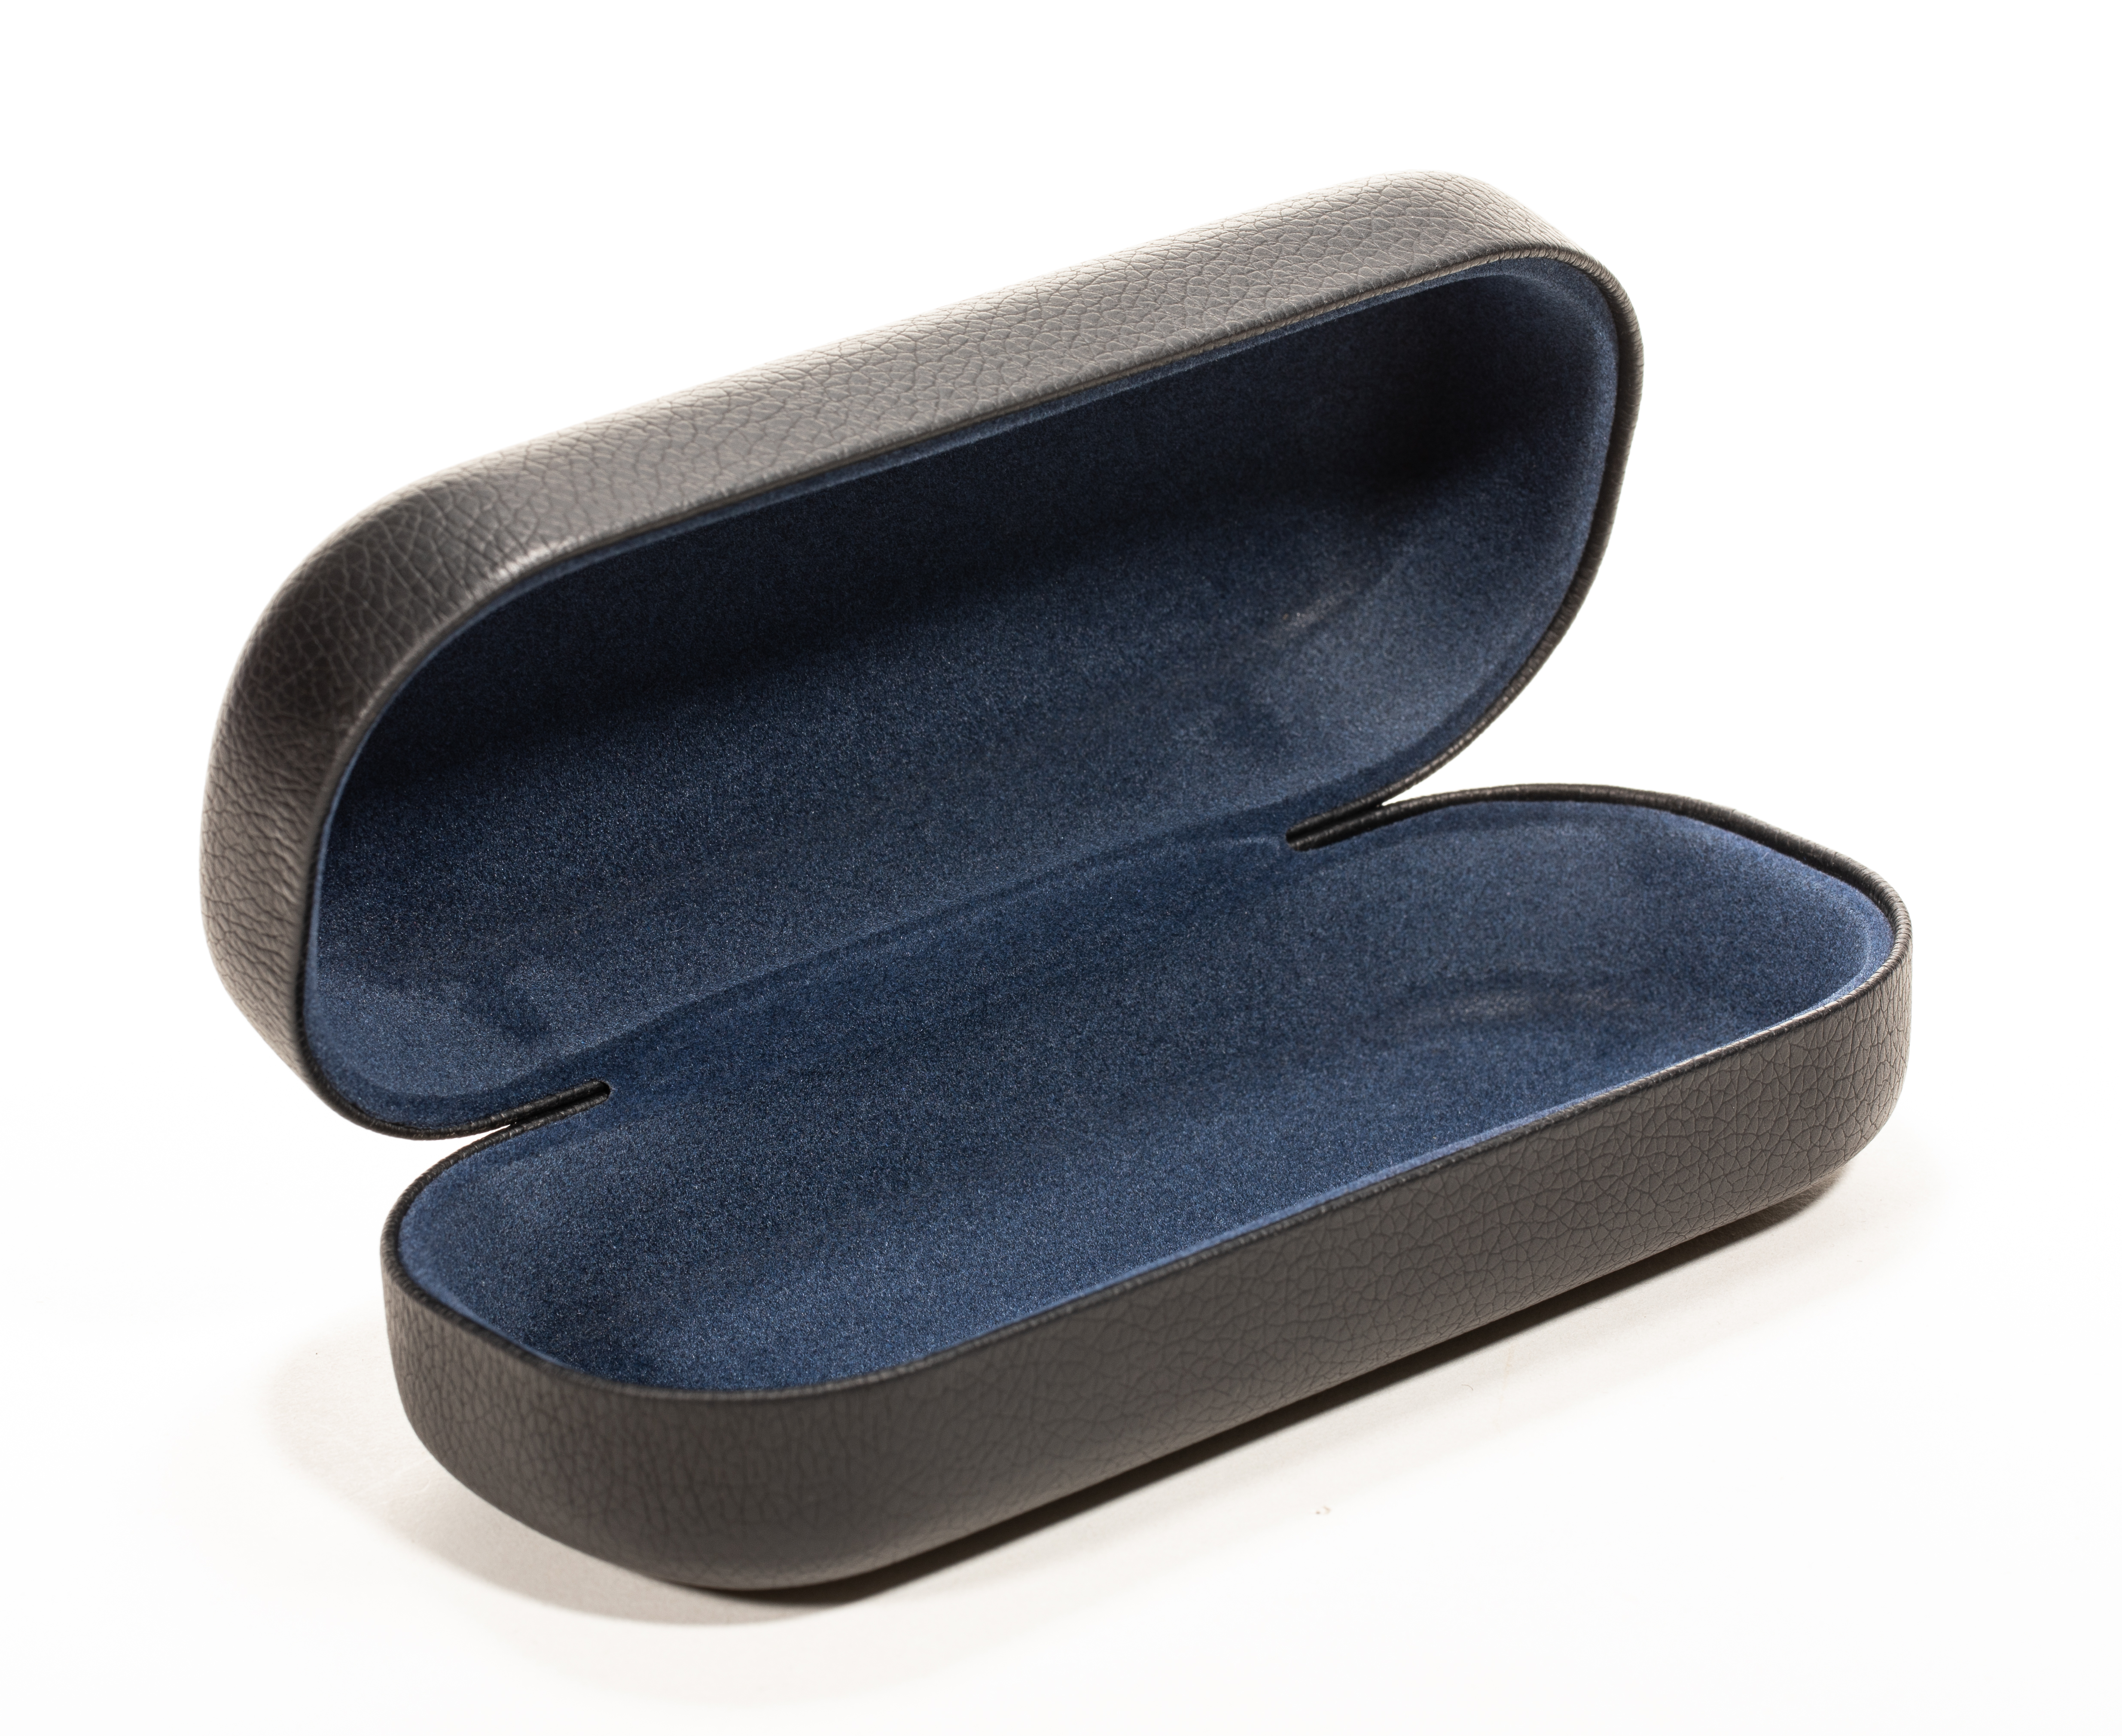 2021 Glasses Box Sunglasses Black Glasses Case, The Appearance Is Thick And Plump